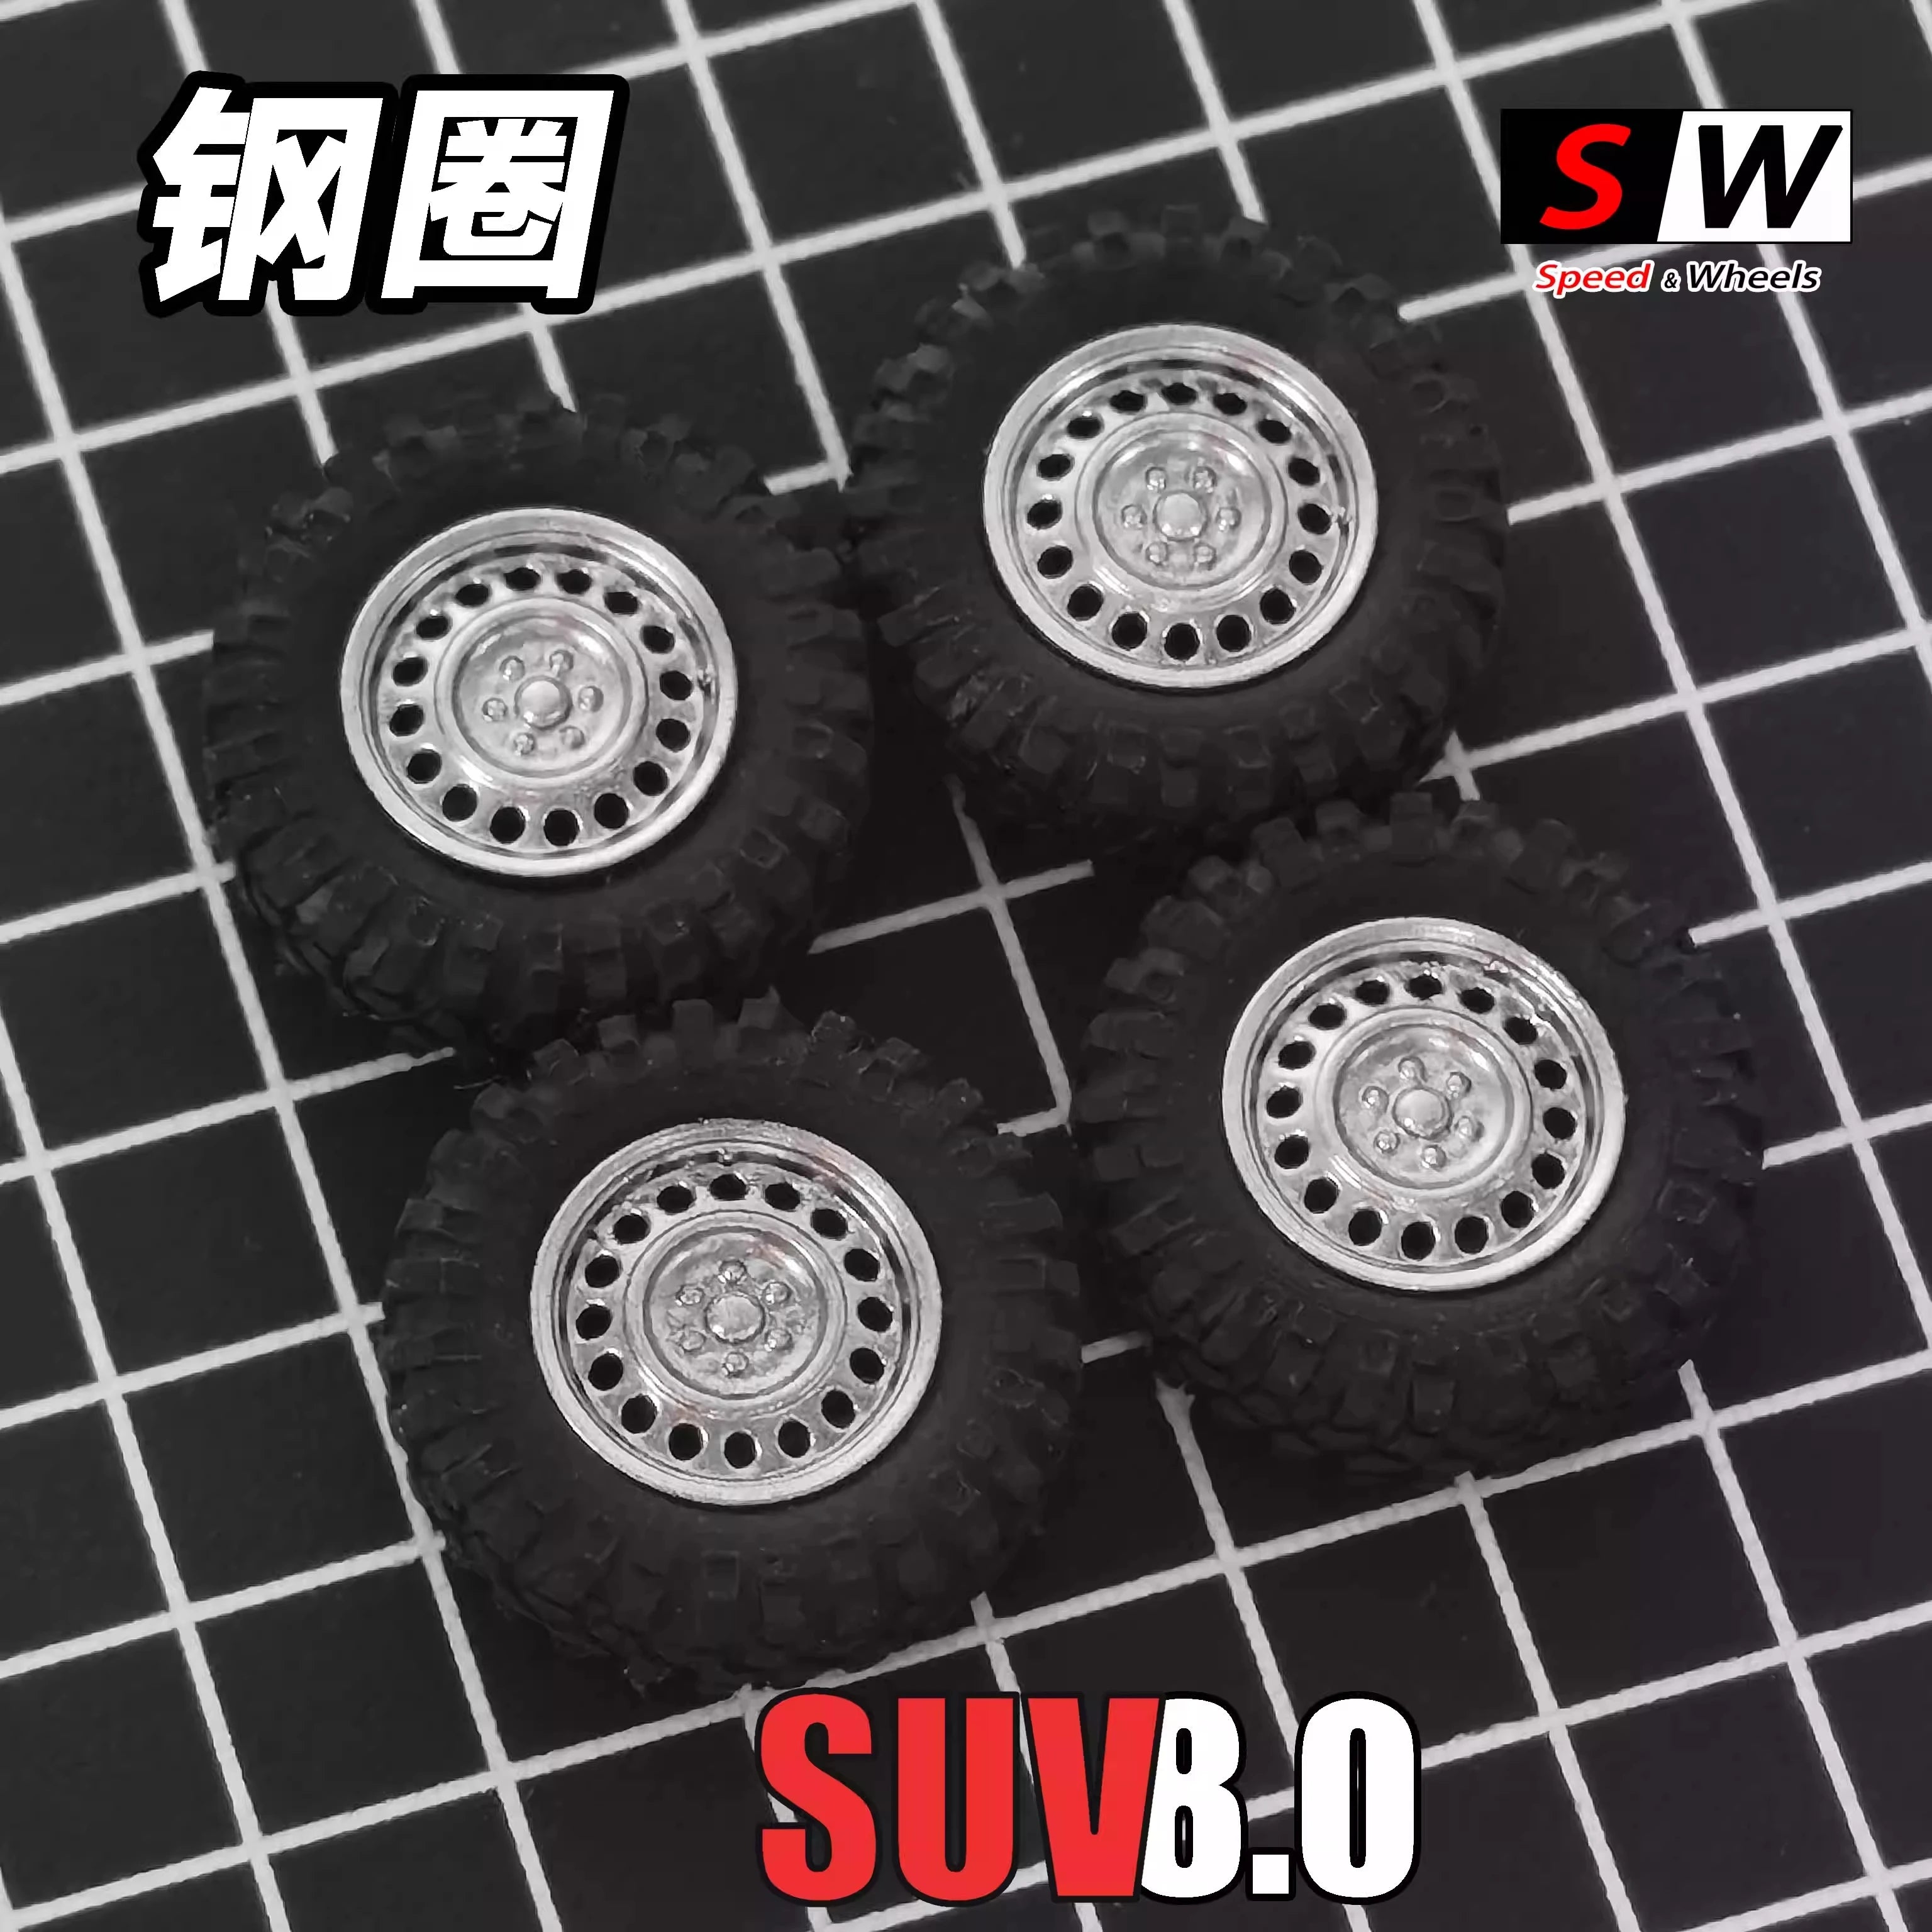 1/64 Off-Road Wheels for SUV